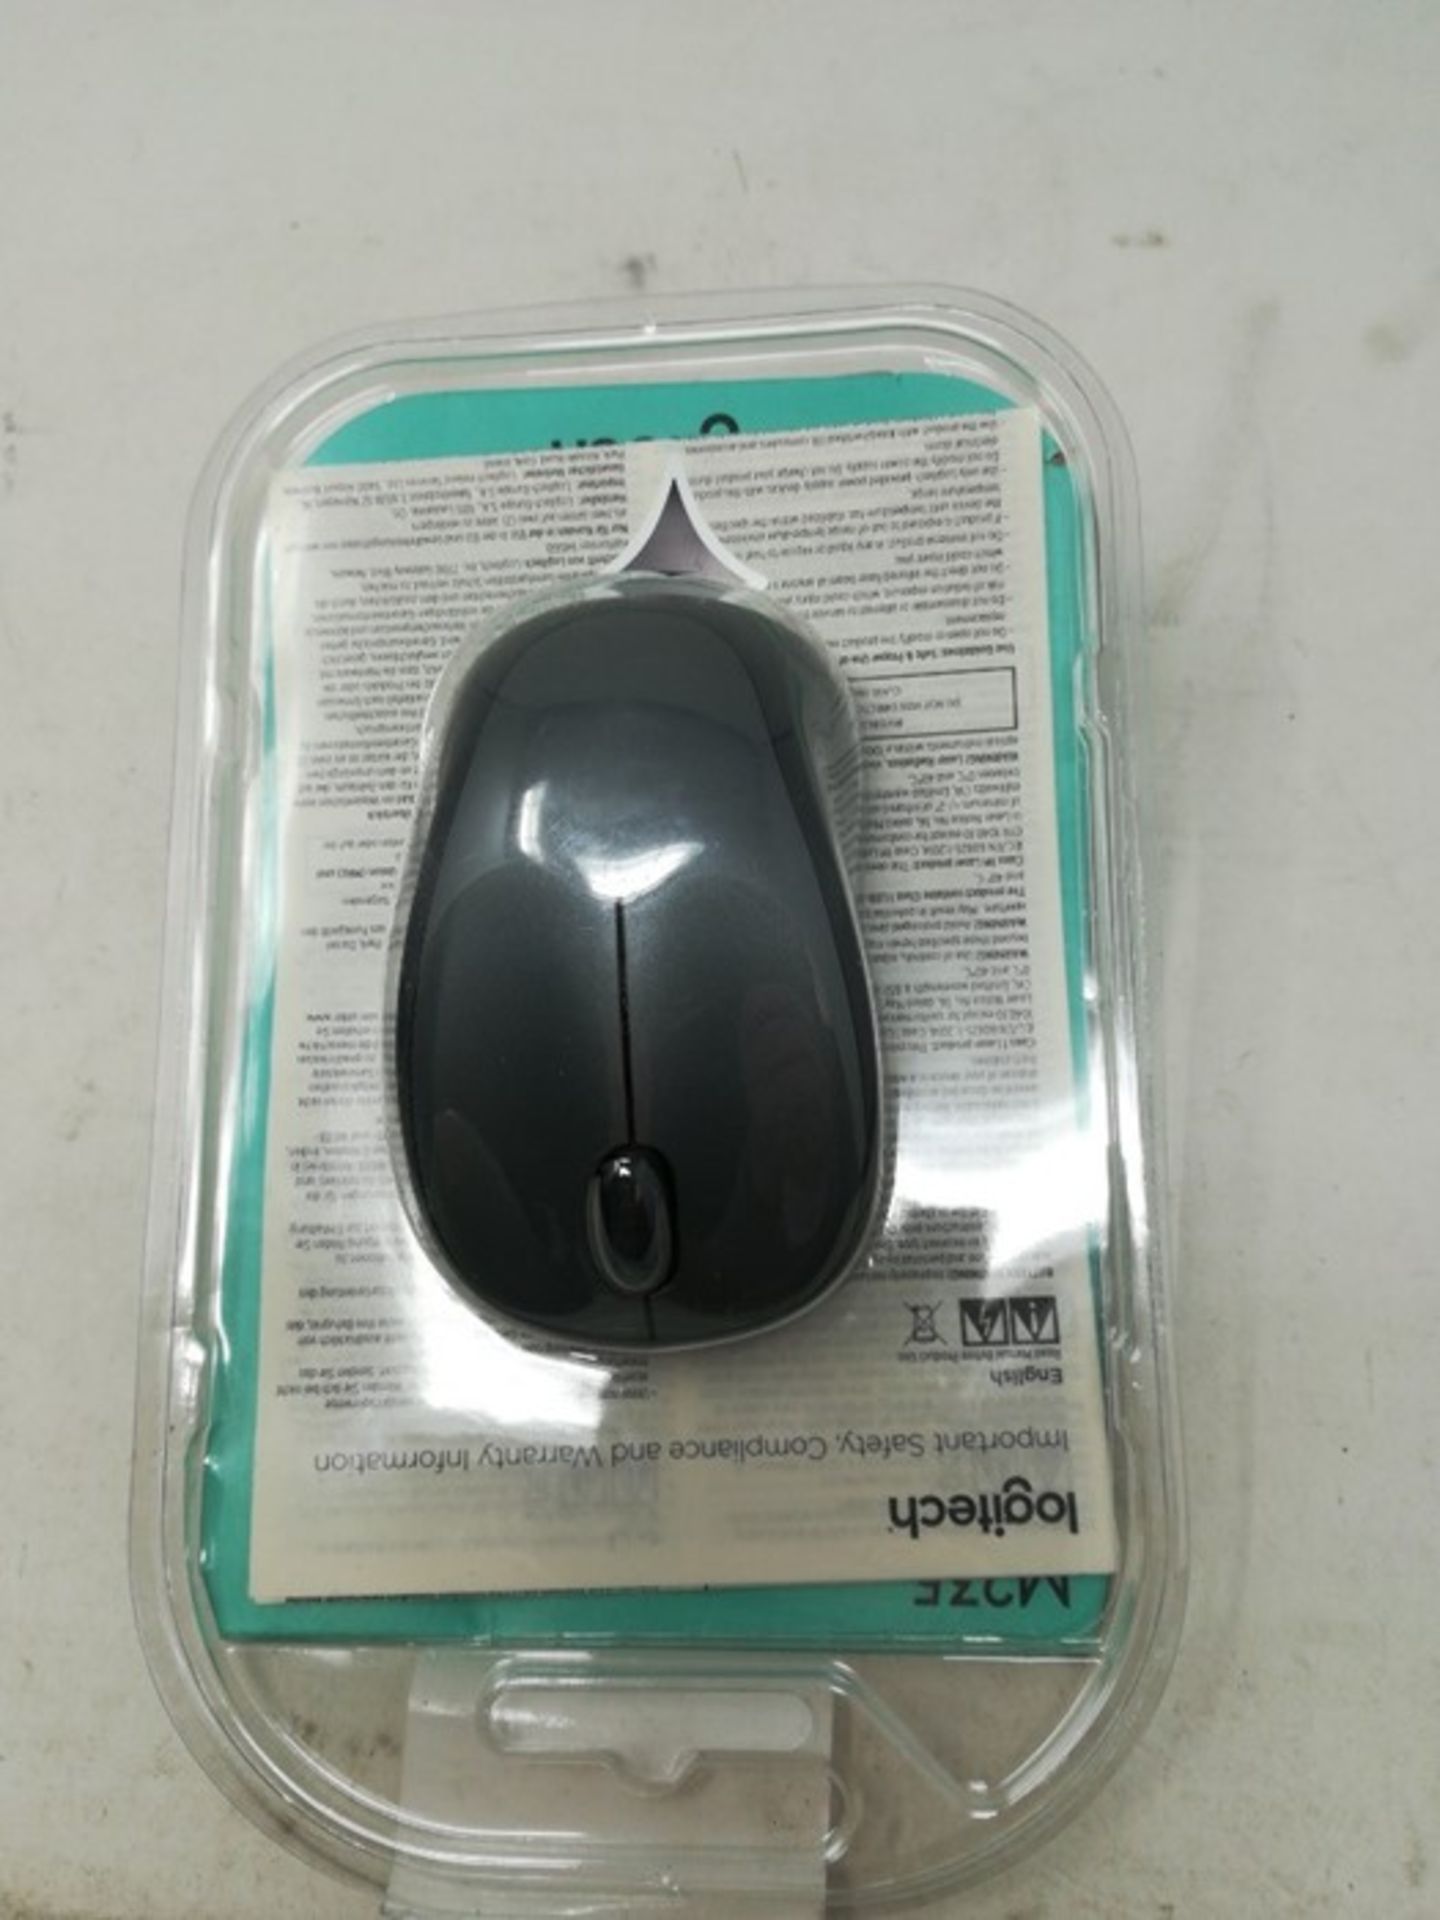 Logitech M235 Wireless Mouse, 2.4 GHz with USB Unifying Receiver, 1000 DPI Optical Tra - Image 2 of 2